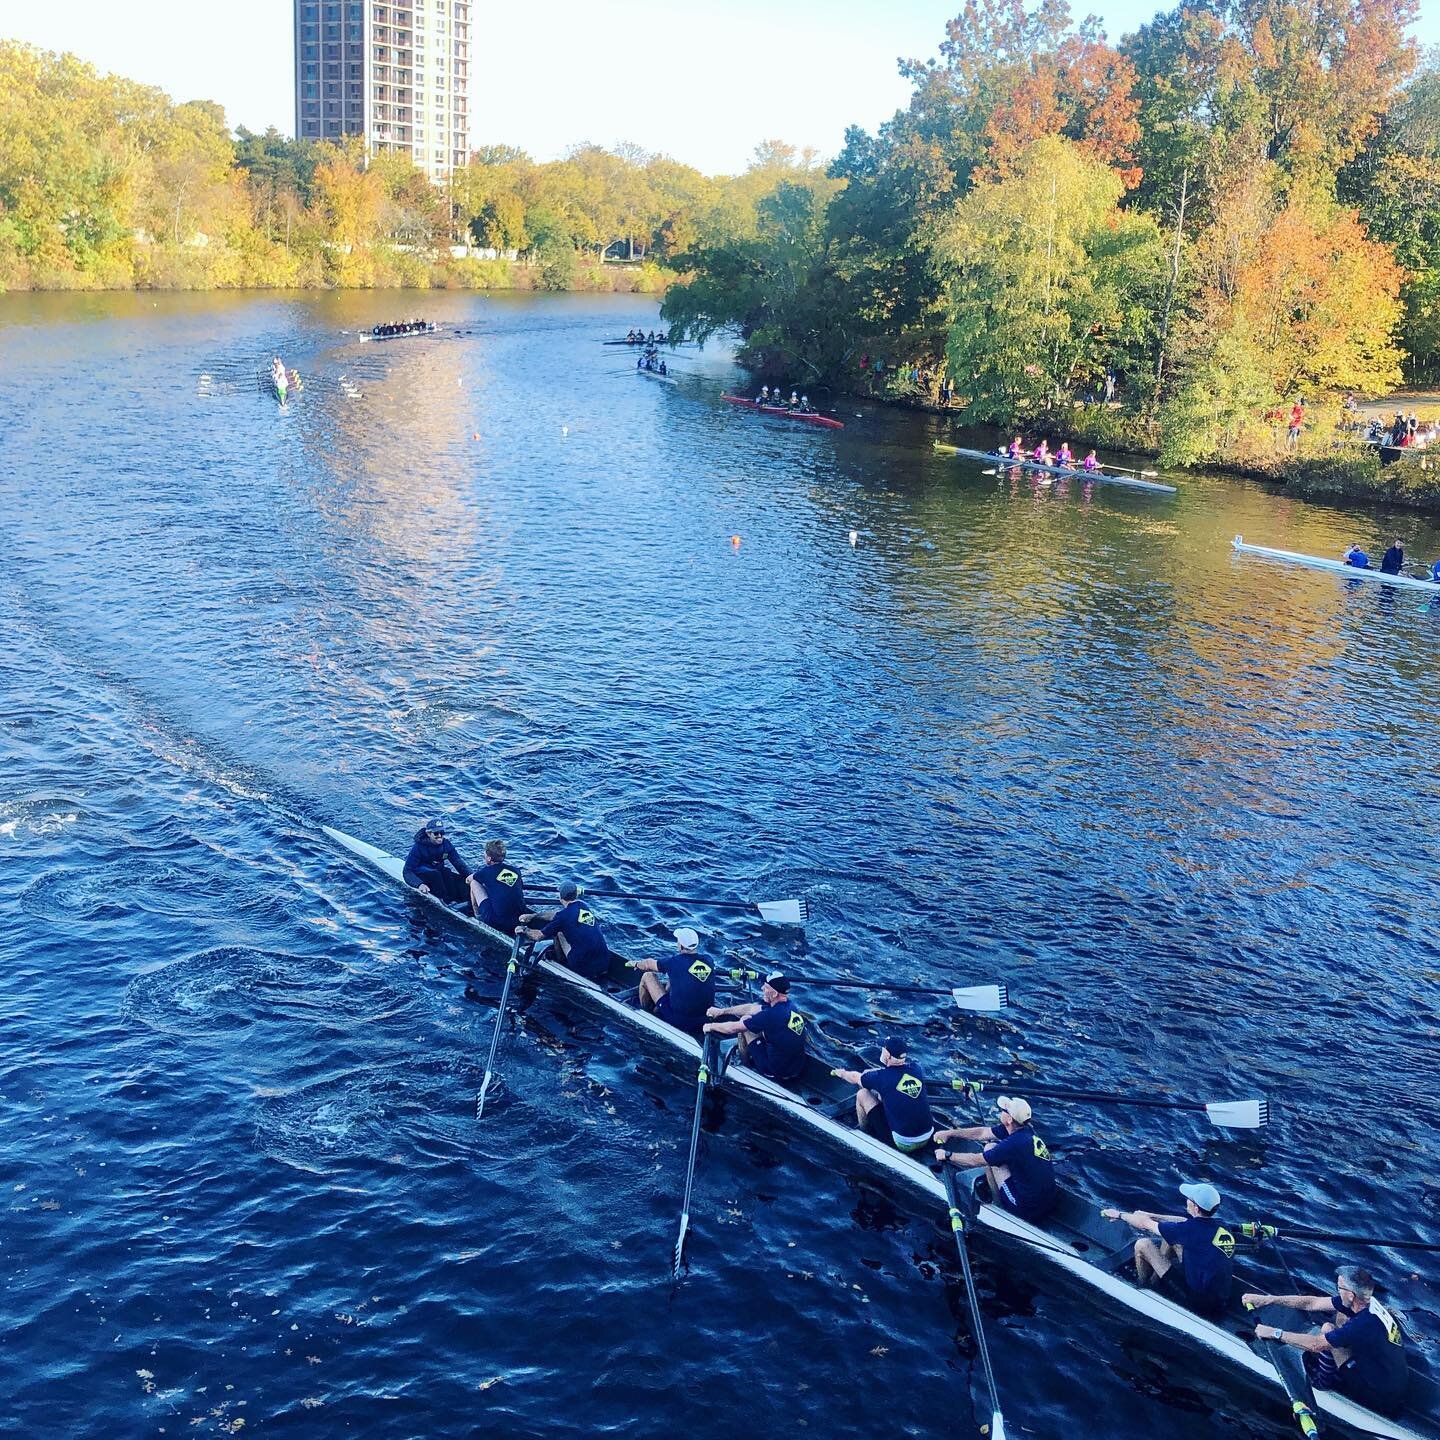 This view from Eliot Bridge never gets old at @hocr1965. Thanks @eastbayrowingclub ladies for letting me squeeze in and join you up there on Saturday!